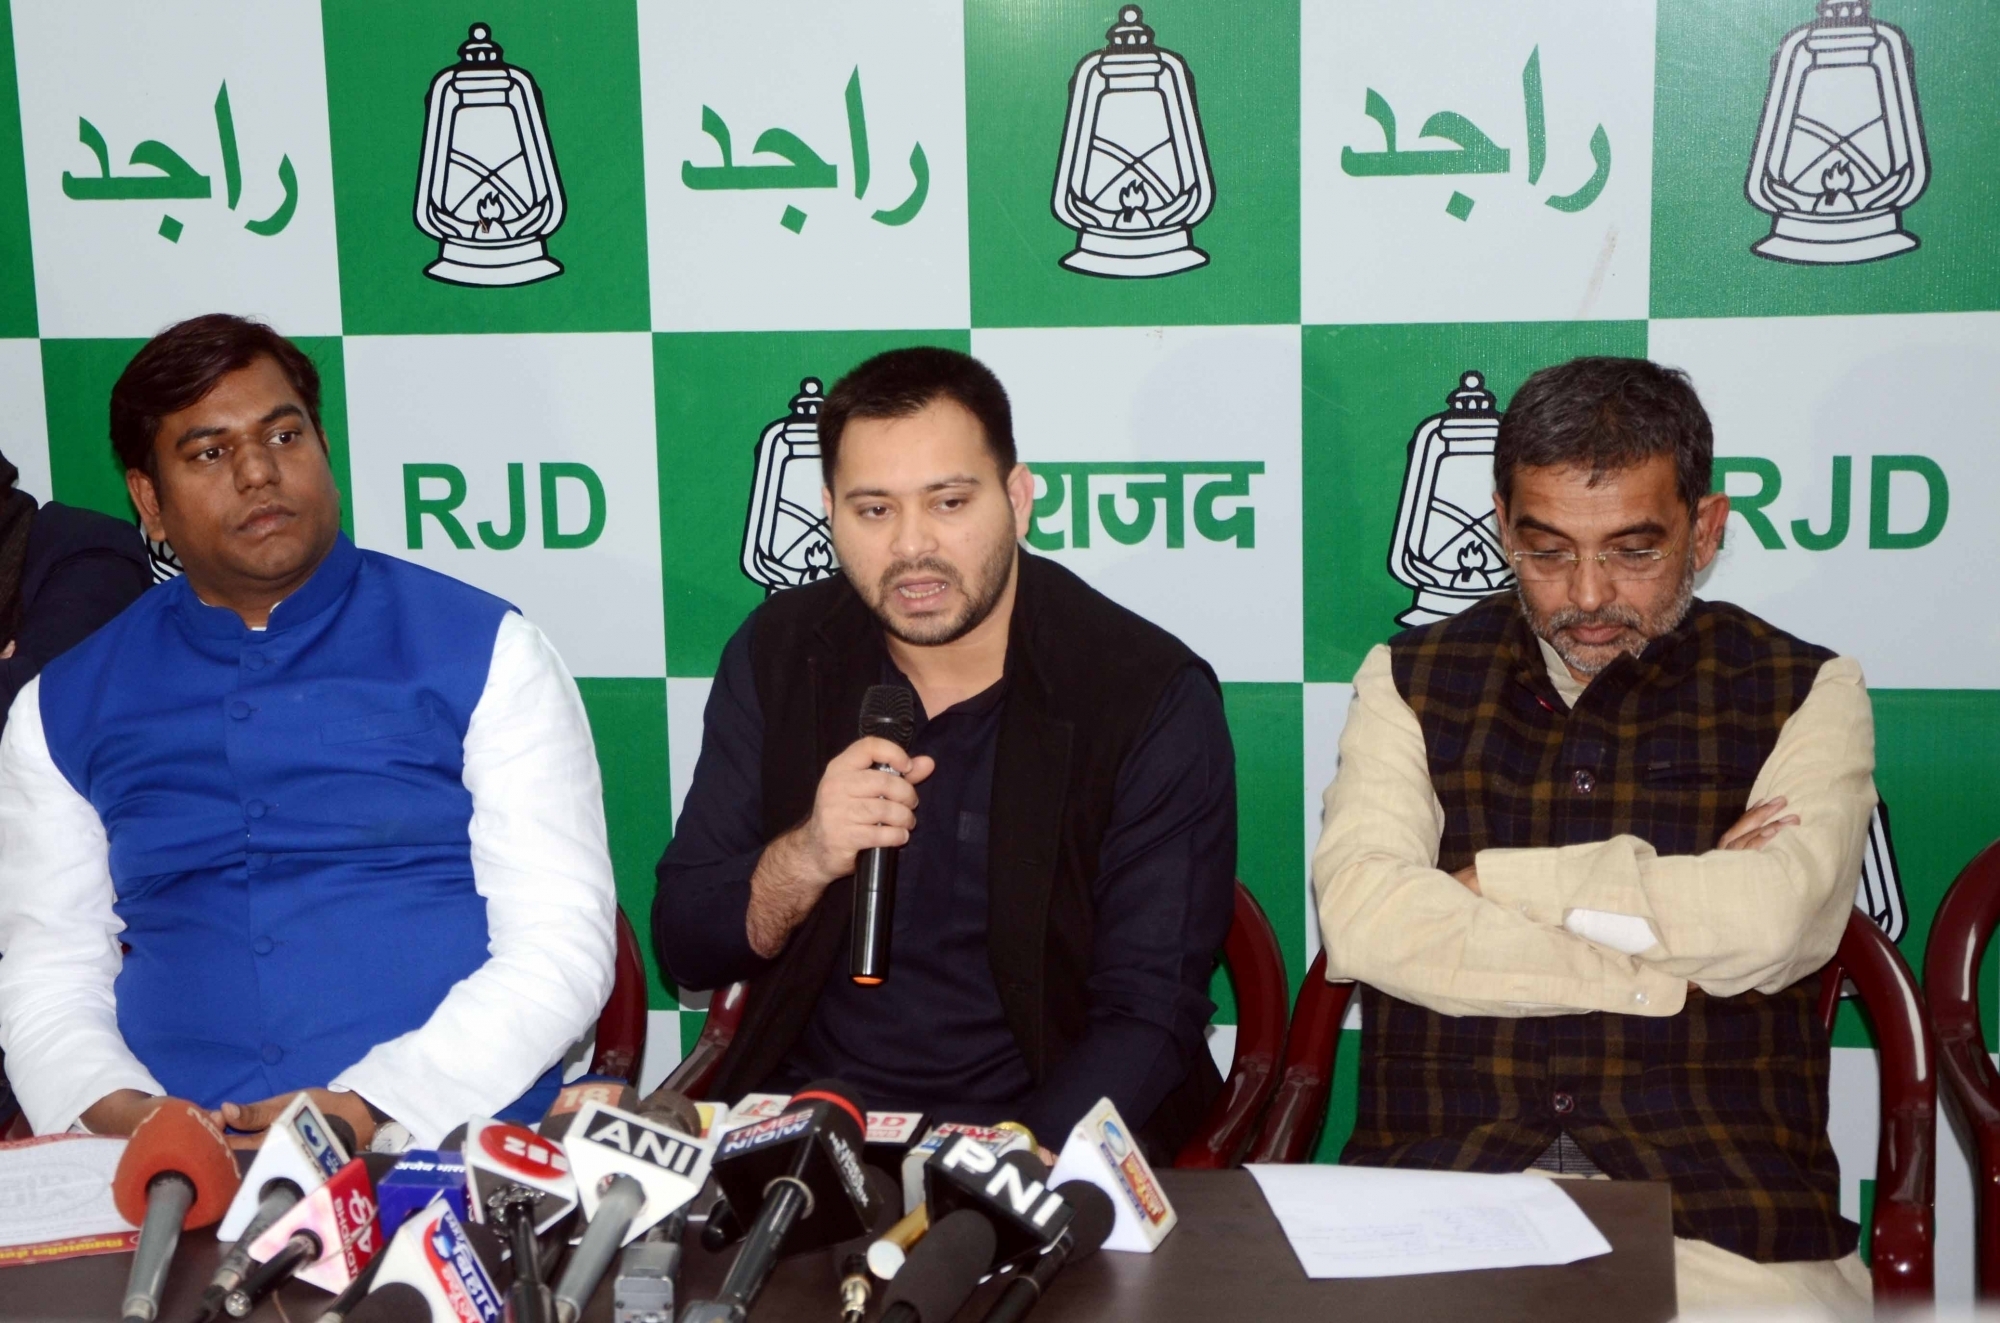 RJD: Bihar assembly polls to be contested under Tejashwi's leadership 